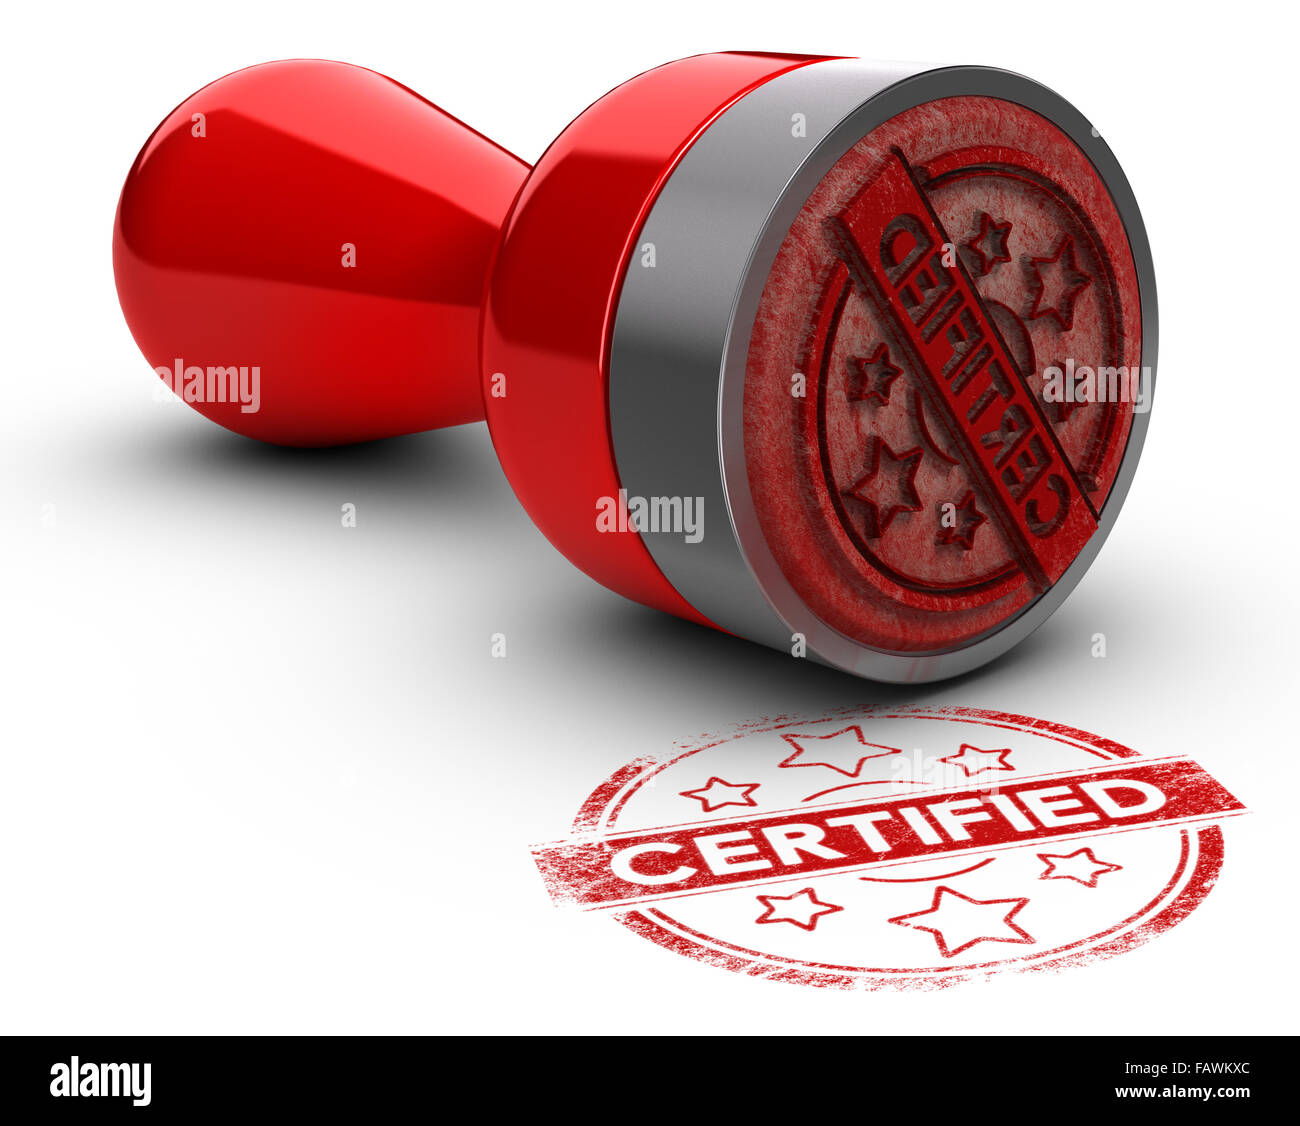 Rubber stamp over white background with the text certified printed on it. concept image for illustration of certification or gua Stock Photo